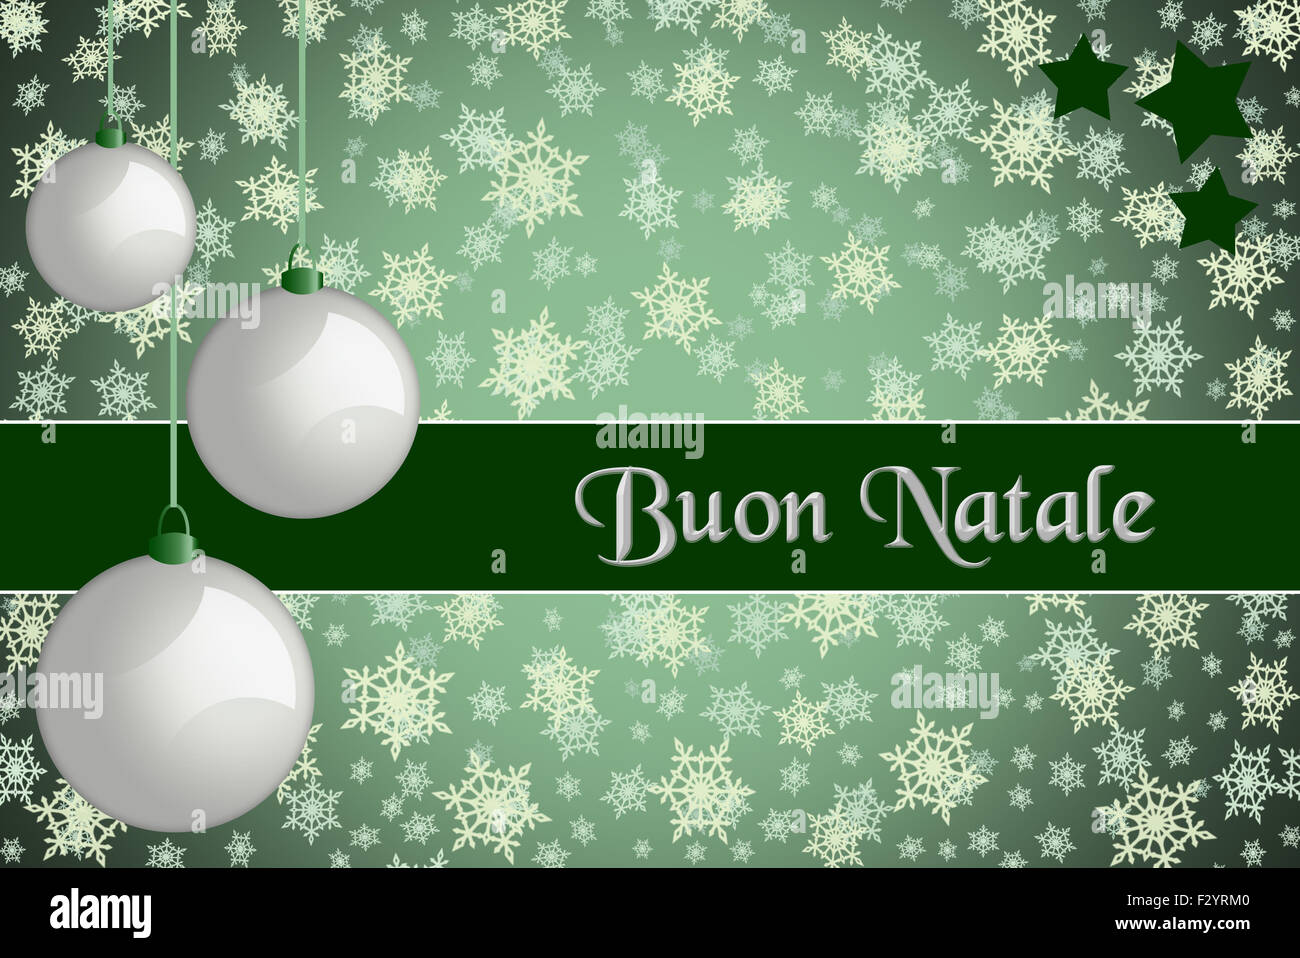 Christmas greeting card. 'Buon Natale' Green colored Christmas card with retro white baubles and snowflake background. Stock Photo